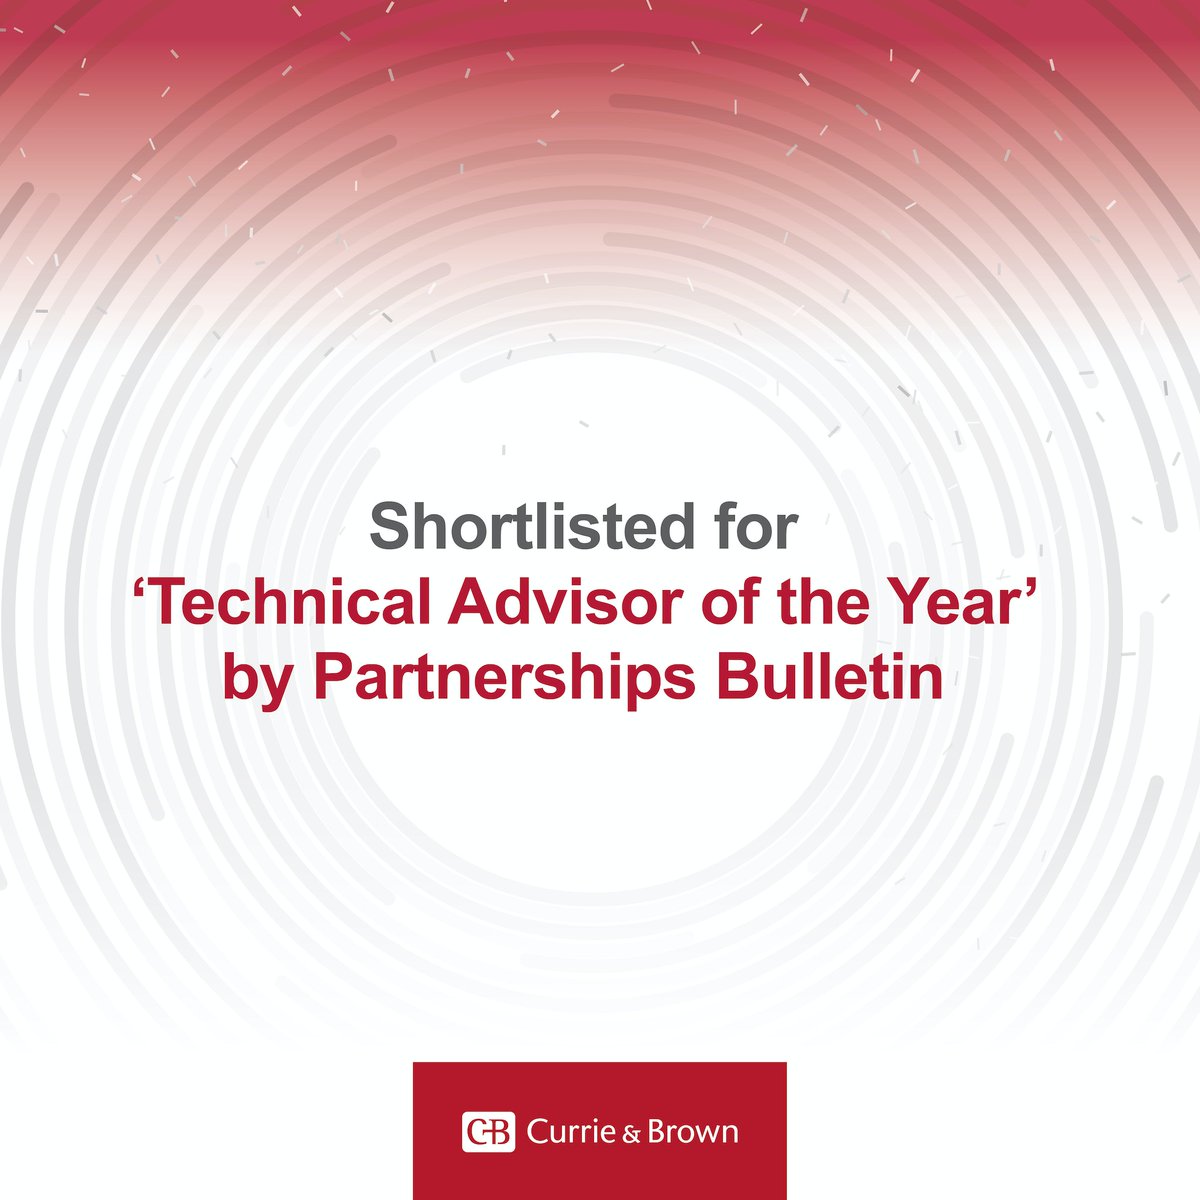 We are delighted to have been shortlisted as Technical Advisor of the Year by #PartnershipsBulletin for our PPP work in Wales and the Middle East. #PartnershipsBulletin #Awards #Shortlist